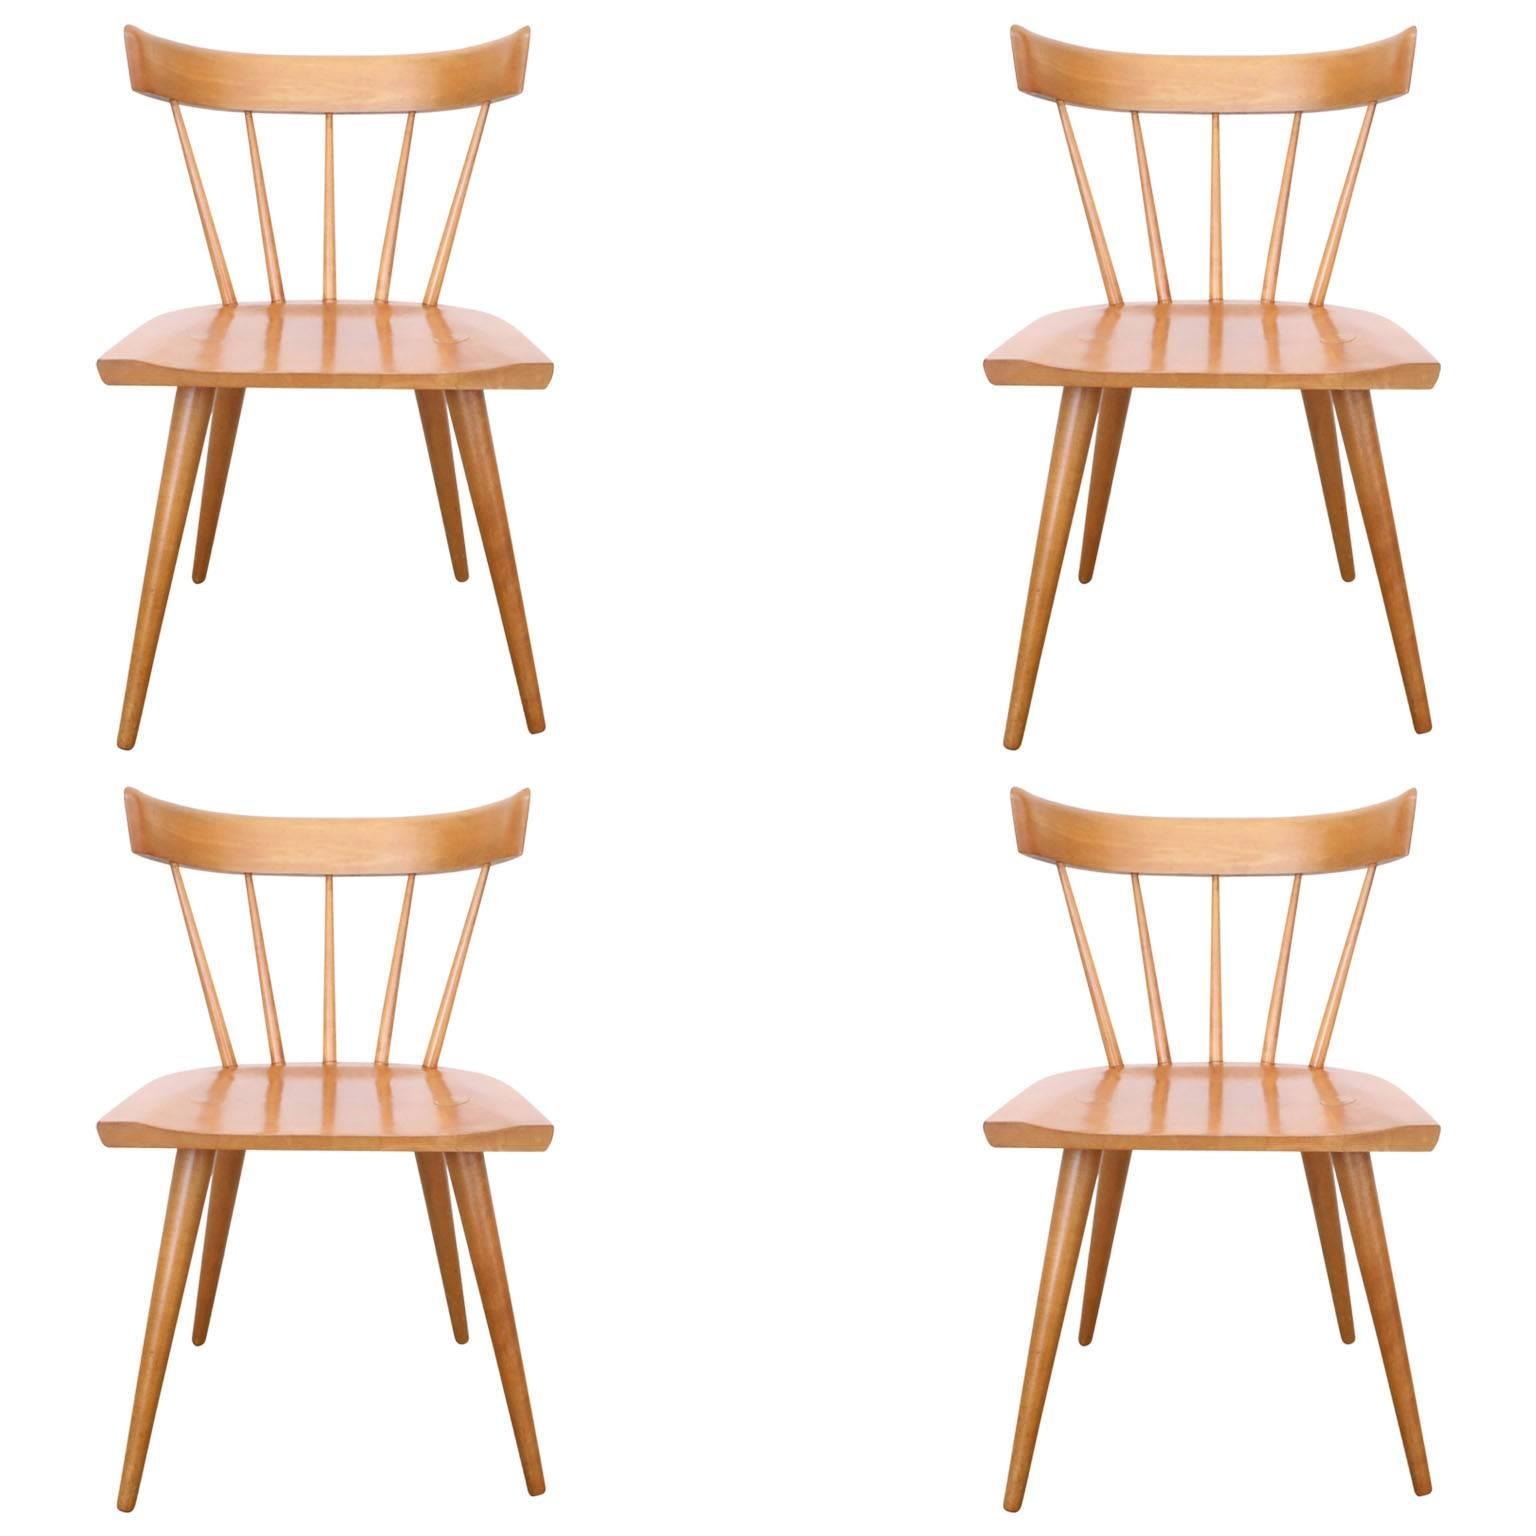 Four Paul McCobb Spindle Back Dining Chairs